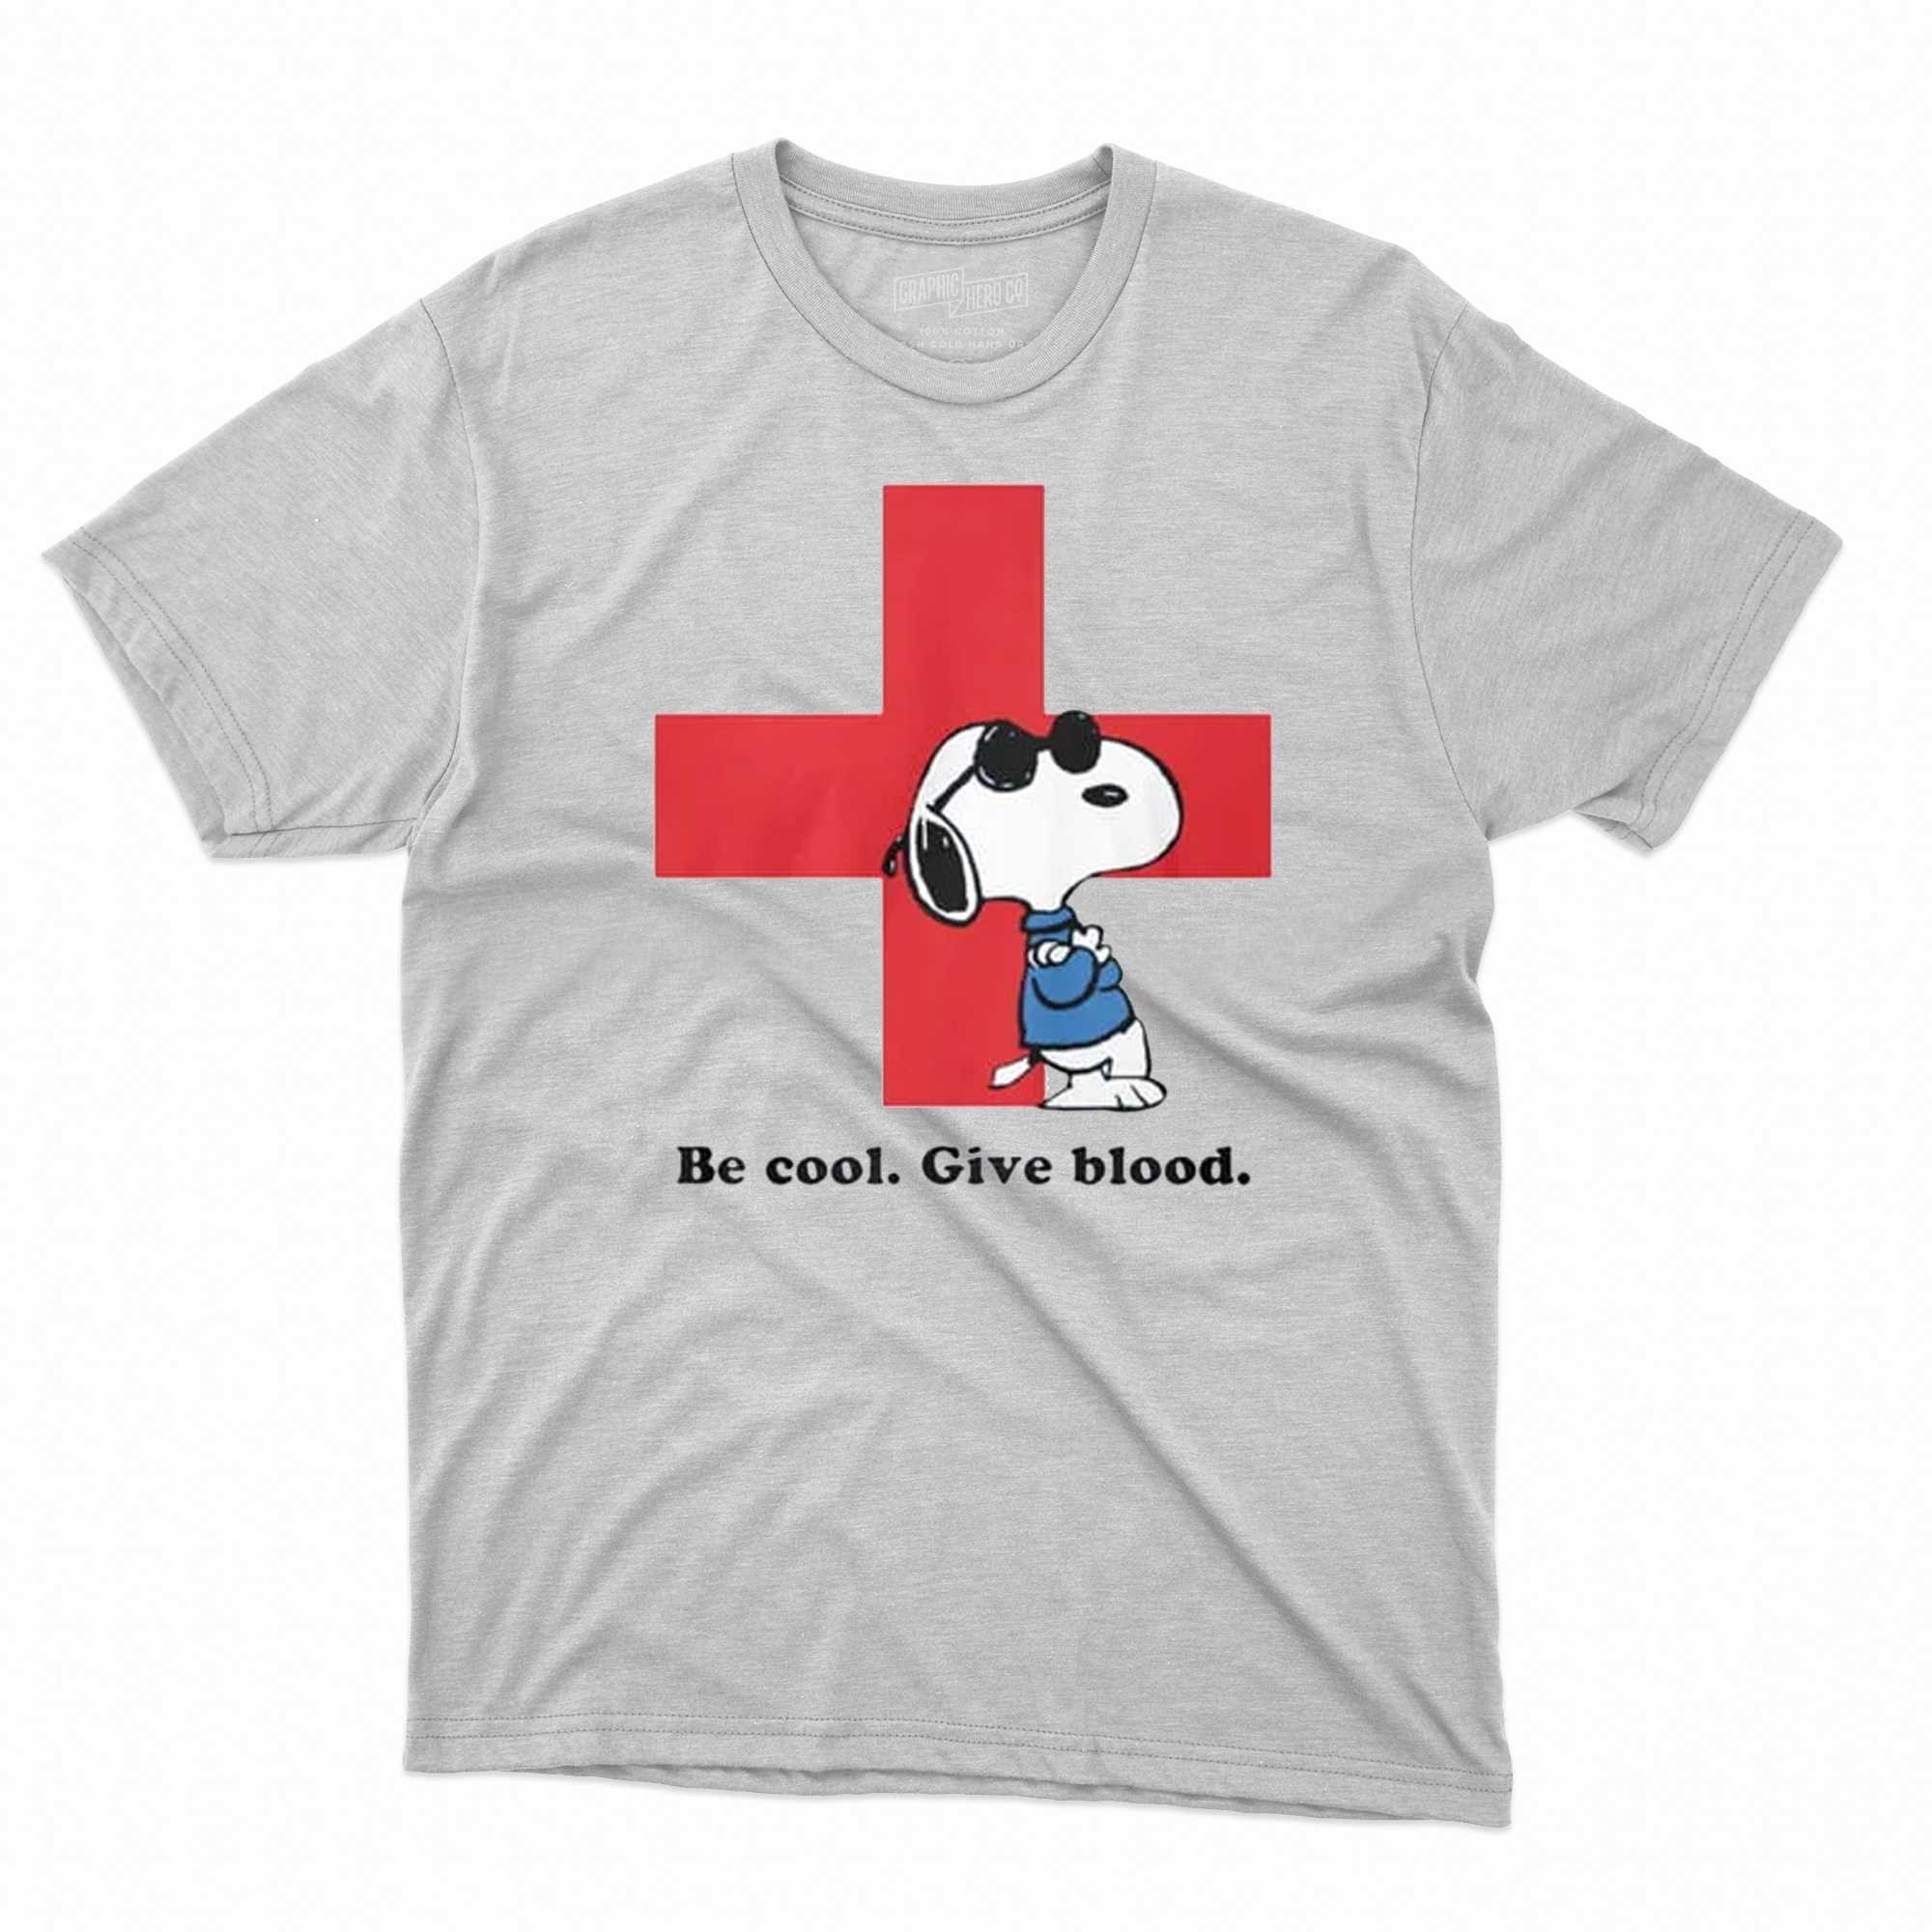 Want This Snoopy T-Shirt? You'll Have to Pay in Blood. - The New York Times